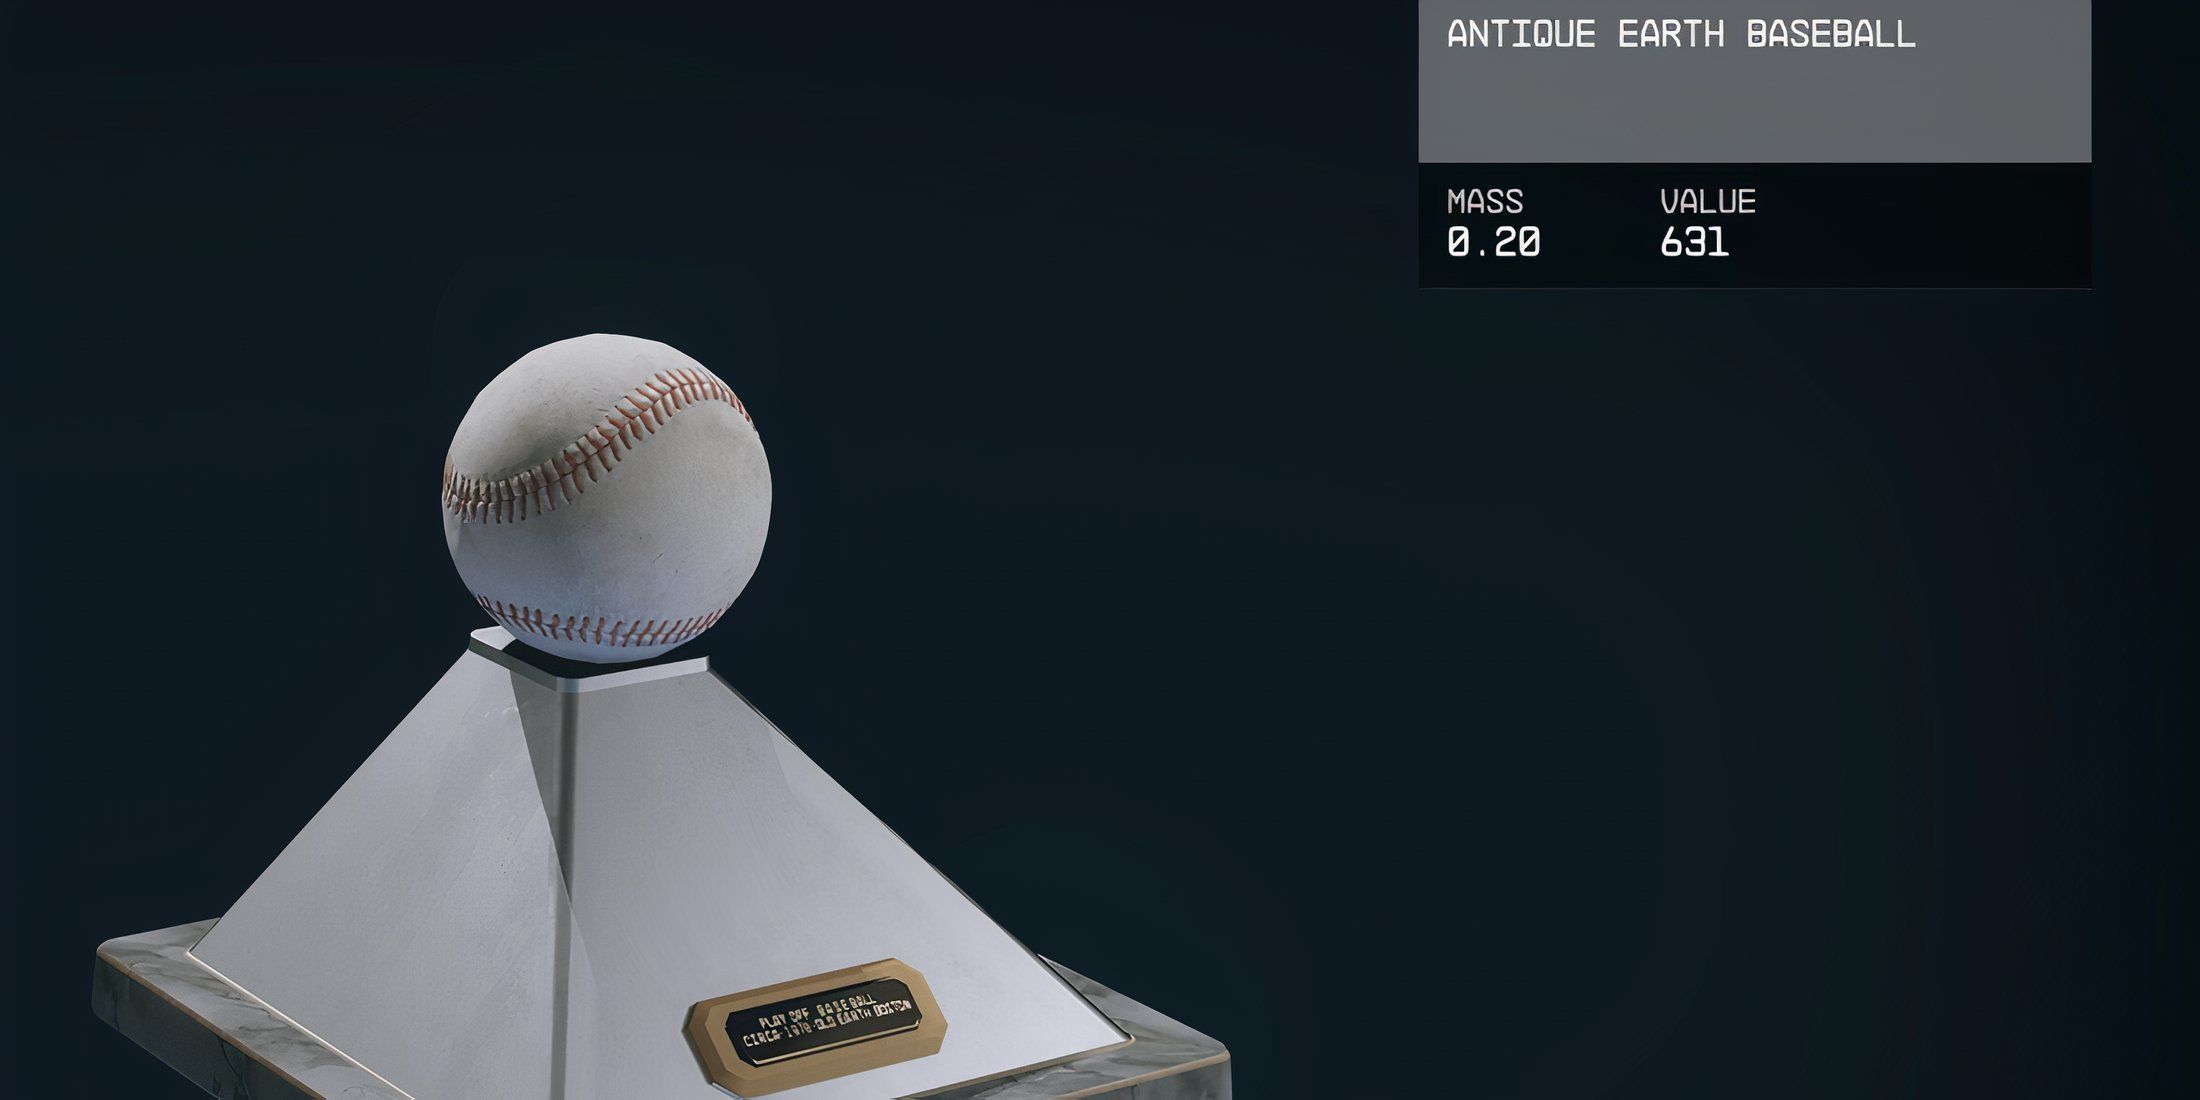 The Antique Earth Baseball item from Starfield